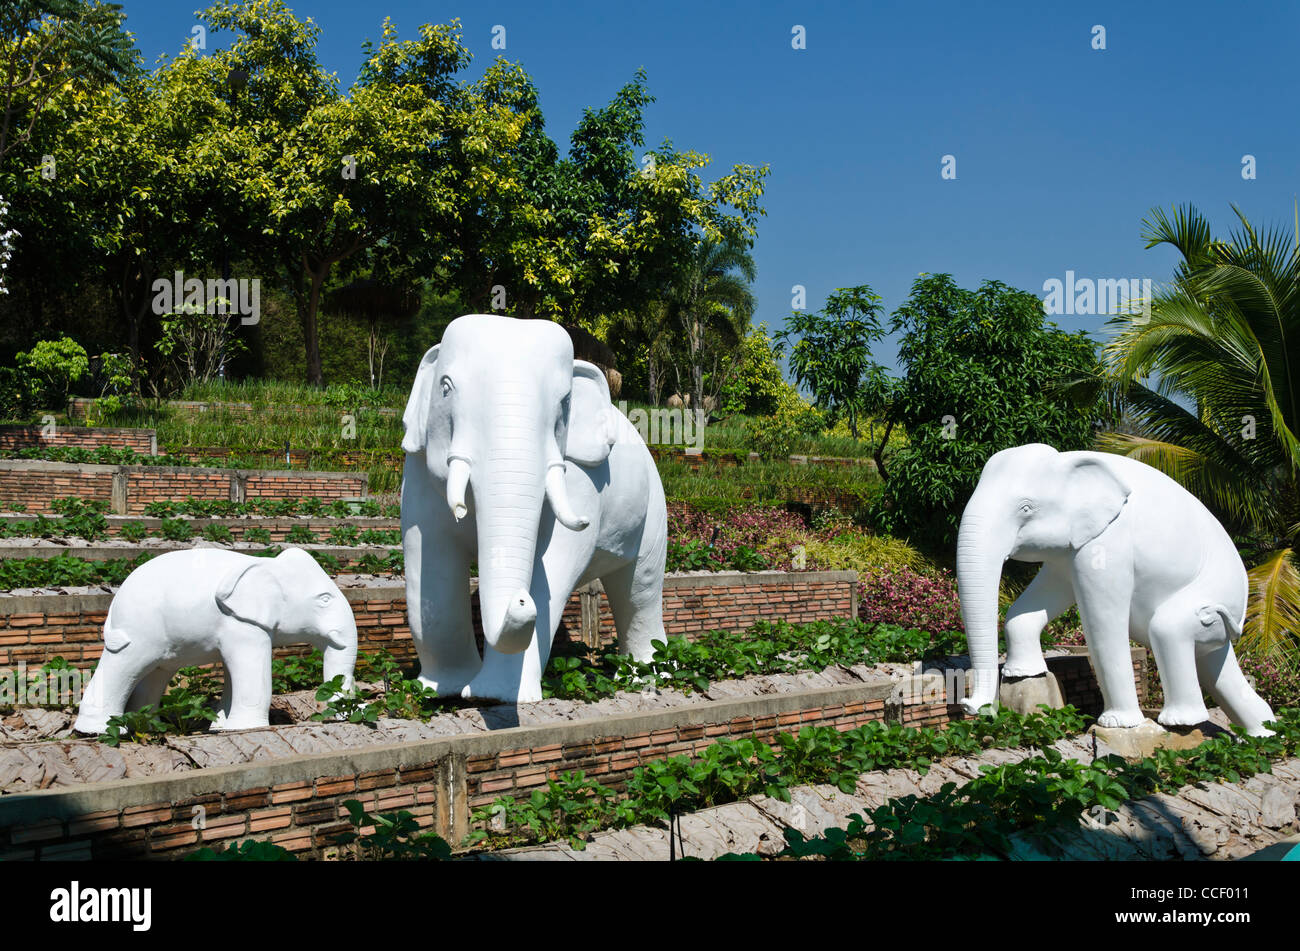 https://c8.alamy.com/comp/CCF011/three-life-size-white-elephant-statues-in-royal-flora-expo-in-chiang-CCF011.jpg